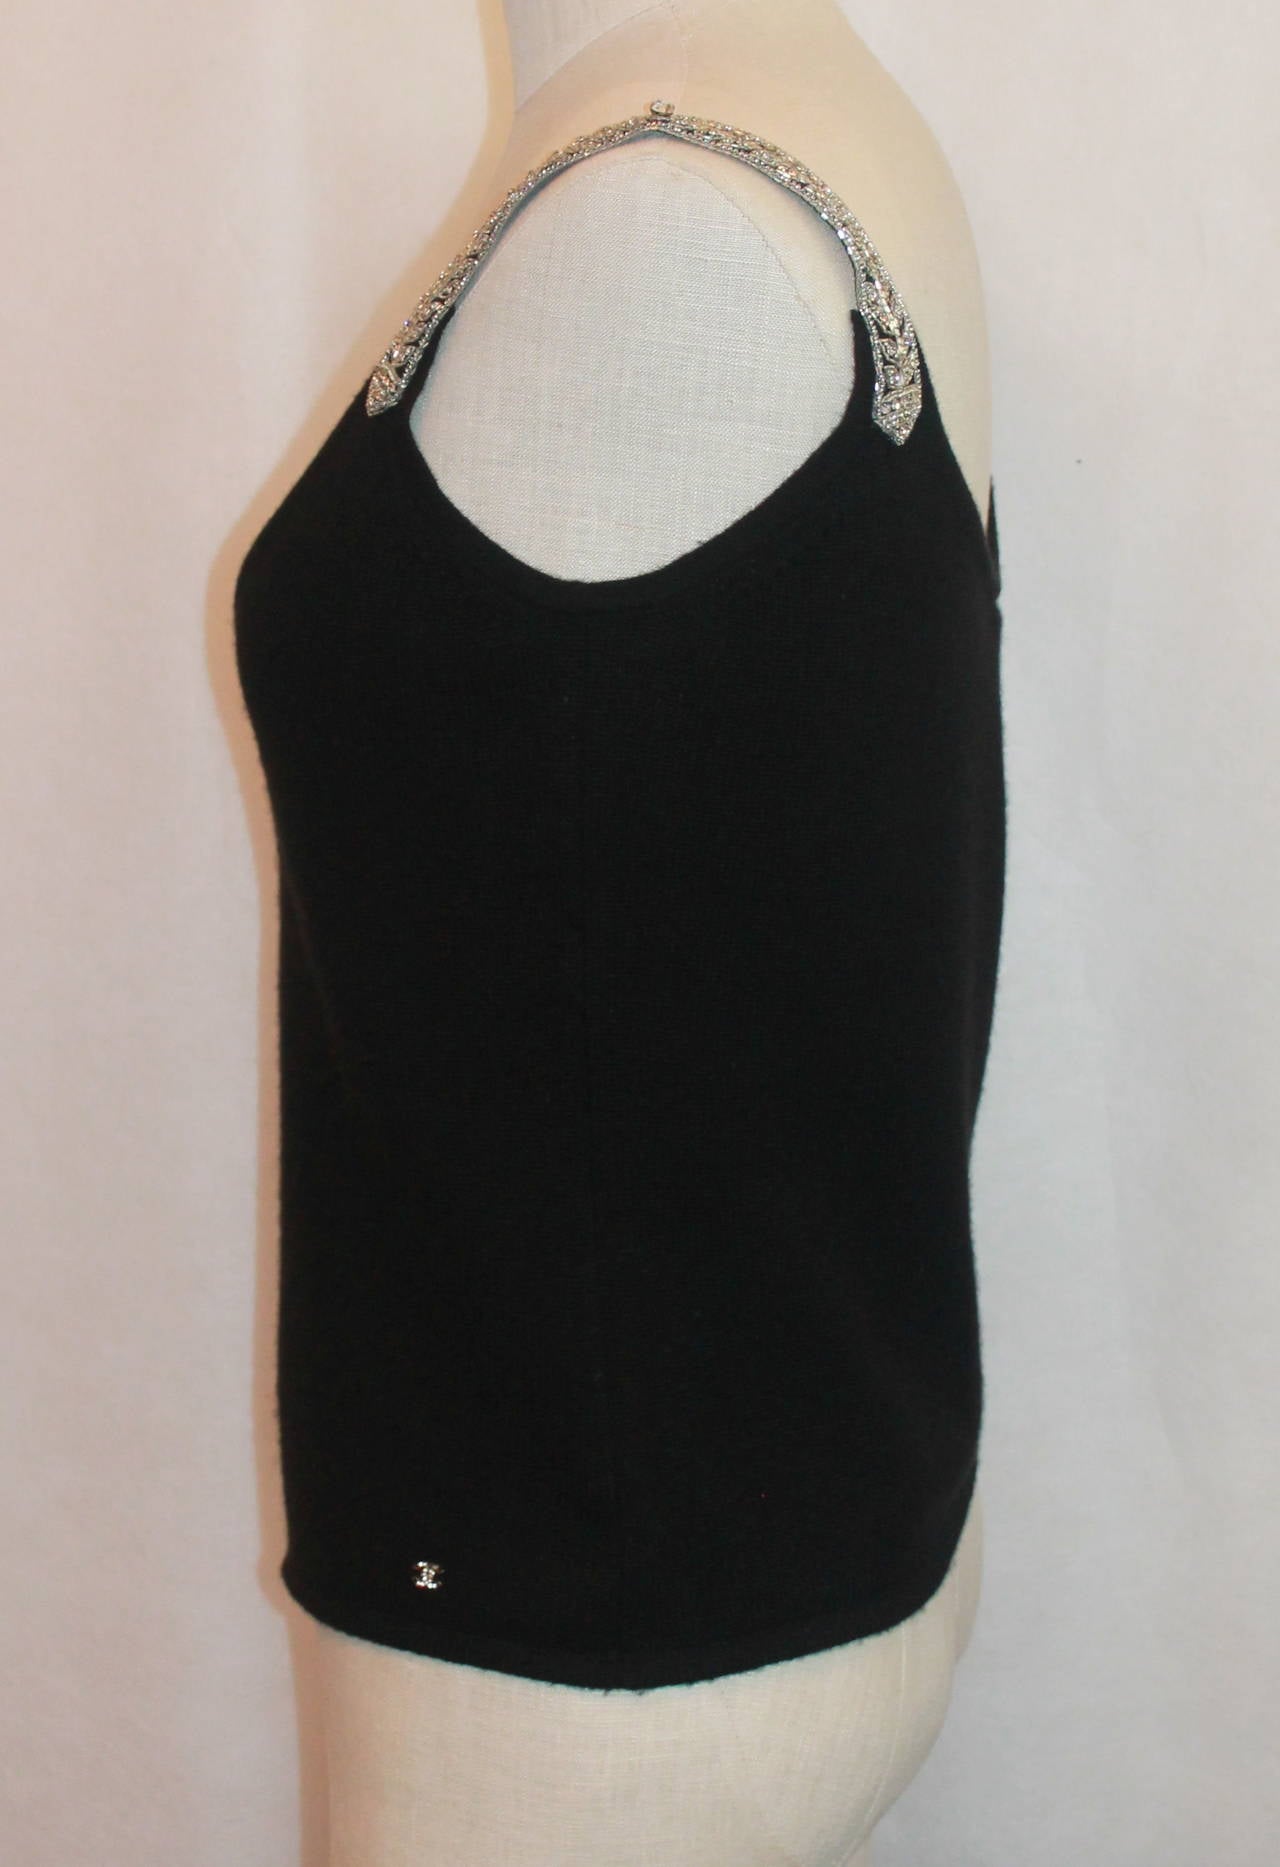 Chanel 2004 Black Cashmere Tank with Rhinestone Straps - 42. This top is in good condition with the cashmere having some wear. The straps have beading and rhinestone embellishing.

Measurements:
Bust- 36 - 40